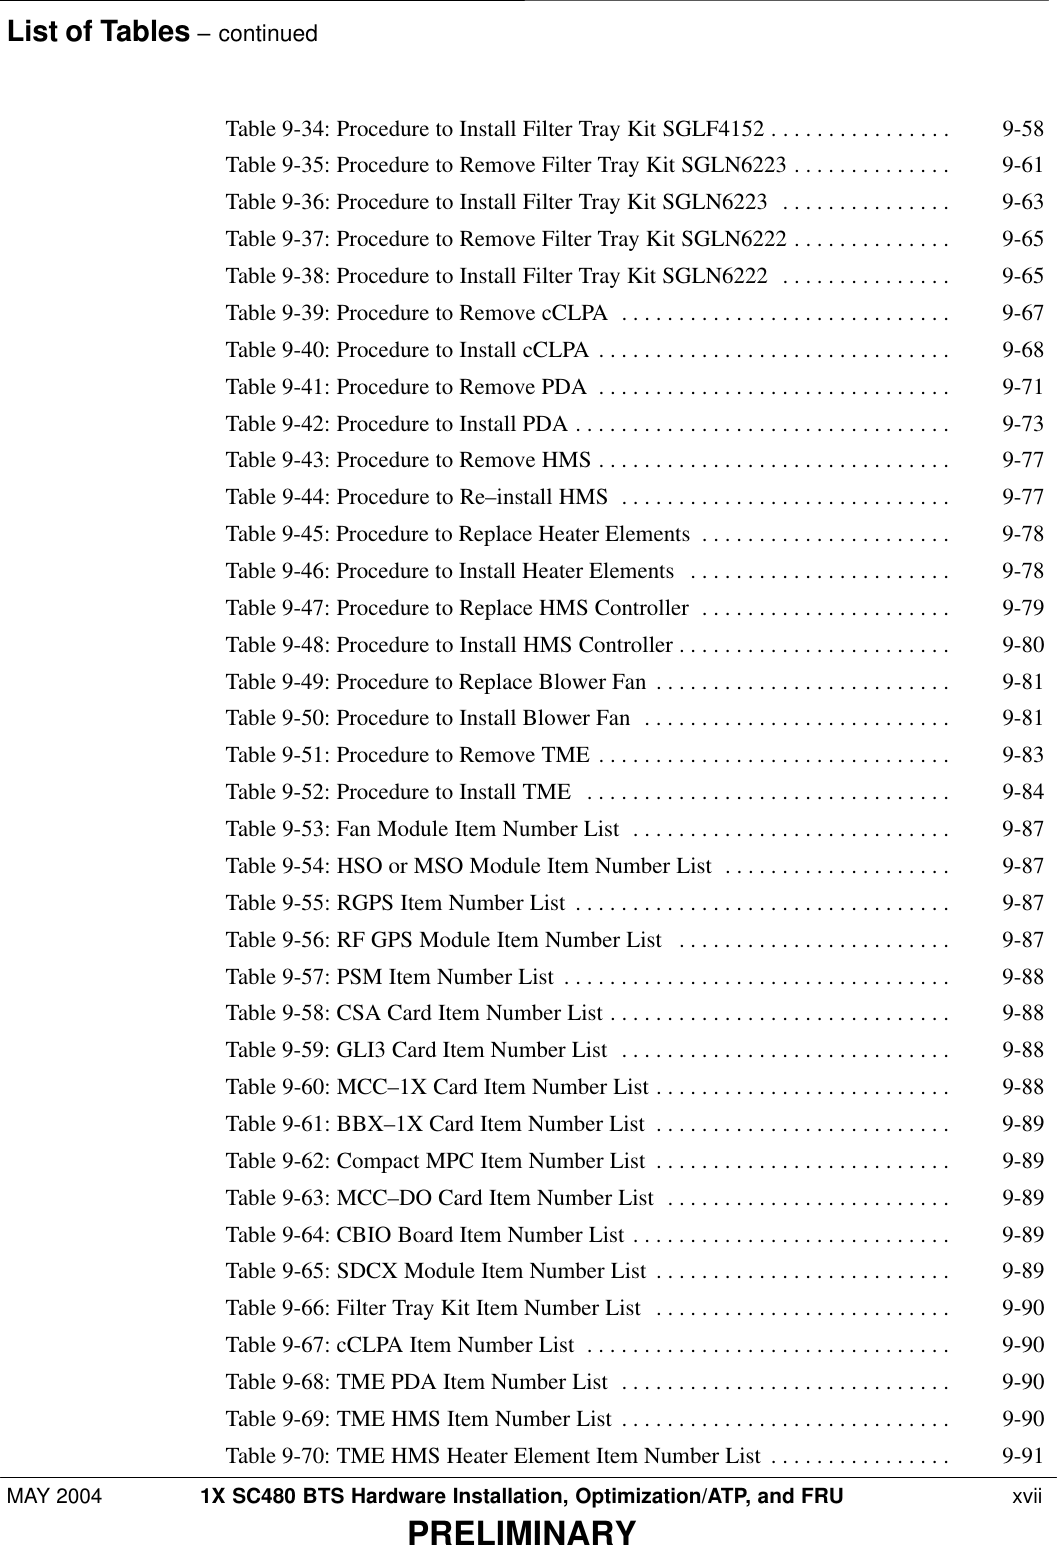 List of Tables – continuedMAY 2004 1X SC480 BTS Hardware Installation, Optimization/ATP, and FRU  xviiPRELIMINARYTable 9-34: Procedure to Install Filter Tray Kit SGLF4152 9-58 . . . . . . . . . . . . . . . . Table 9-35: Procedure to Remove Filter Tray Kit SGLN6223 9-61 . . . . . . . . . . . . . . Table 9-36: Procedure to Install Filter Tray Kit SGLN6223 9-63 . . . . . . . . . . . . . . . Table 9-37: Procedure to Remove Filter Tray Kit SGLN6222 9-65 . . . . . . . . . . . . . . Table 9-38: Procedure to Install Filter Tray Kit SGLN6222 9-65 . . . . . . . . . . . . . . . Table 9-39: Procedure to Remove cCLPA 9-67 . . . . . . . . . . . . . . . . . . . . . . . . . . . . . Table 9-40: Procedure to Install cCLPA 9-68 . . . . . . . . . . . . . . . . . . . . . . . . . . . . . . . Table 9-41: Procedure to Remove PDA 9-71 . . . . . . . . . . . . . . . . . . . . . . . . . . . . . . . Table 9-42: Procedure to Install PDA 9-73 . . . . . . . . . . . . . . . . . . . . . . . . . . . . . . . . . Table 9-43: Procedure to Remove HMS 9-77 . . . . . . . . . . . . . . . . . . . . . . . . . . . . . . . Table 9-44: Procedure to Re–install HMS 9-77 . . . . . . . . . . . . . . . . . . . . . . . . . . . . . Table 9-45: Procedure to Replace Heater Elements 9-78 . . . . . . . . . . . . . . . . . . . . . . Table 9-46: Procedure to Install Heater Elements 9-78 . . . . . . . . . . . . . . . . . . . . . . . Table 9-47: Procedure to Replace HMS Controller 9-79 . . . . . . . . . . . . . . . . . . . . . . Table 9-48: Procedure to Install HMS Controller 9-80 . . . . . . . . . . . . . . . . . . . . . . . . Table 9-49: Procedure to Replace Blower Fan 9-81 . . . . . . . . . . . . . . . . . . . . . . . . . . Table 9-50: Procedure to Install Blower Fan 9-81 . . . . . . . . . . . . . . . . . . . . . . . . . . . Table 9-51: Procedure to Remove TME 9-83 . . . . . . . . . . . . . . . . . . . . . . . . . . . . . . . Table 9-52: Procedure to Install TME 9-84 . . . . . . . . . . . . . . . . . . . . . . . . . . . . . . . . Table 9-53: Fan Module Item Number List 9-87 . . . . . . . . . . . . . . . . . . . . . . . . . . . . Table 9-54: HSO or MSO Module Item Number List 9-87 . . . . . . . . . . . . . . . . . . . . Table 9-55: RGPS Item Number List 9-87 . . . . . . . . . . . . . . . . . . . . . . . . . . . . . . . . . Table 9-56: RF GPS Module Item Number List 9-87 . . . . . . . . . . . . . . . . . . . . . . . . Table 9-57: PSM Item Number List 9-88 . . . . . . . . . . . . . . . . . . . . . . . . . . . . . . . . . . Table 9-58: CSA Card Item Number List 9-88 . . . . . . . . . . . . . . . . . . . . . . . . . . . . . . Table 9-59: GLI3 Card Item Number List 9-88 . . . . . . . . . . . . . . . . . . . . . . . . . . . . . Table 9-60: MCC–1X Card Item Number List 9-88 . . . . . . . . . . . . . . . . . . . . . . . . . . Table 9-61: BBX–1X Card Item Number List 9-89 . . . . . . . . . . . . . . . . . . . . . . . . . . Table 9-62: Compact MPC Item Number List 9-89 . . . . . . . . . . . . . . . . . . . . . . . . . . Table 9-63: MCC–DO Card Item Number List 9-89 . . . . . . . . . . . . . . . . . . . . . . . . . Table 9-64: CBIO Board Item Number List 9-89 . . . . . . . . . . . . . . . . . . . . . . . . . . . . Table 9-65: SDCX Module Item Number List 9-89 . . . . . . . . . . . . . . . . . . . . . . . . . . Table 9-66: Filter Tray Kit Item Number List 9-90 . . . . . . . . . . . . . . . . . . . . . . . . . . Table 9-67: cCLPA Item Number List 9-90 . . . . . . . . . . . . . . . . . . . . . . . . . . . . . . . . Table 9-68: TME PDA Item Number List 9-90 . . . . . . . . . . . . . . . . . . . . . . . . . . . . . Table 9-69: TME HMS Item Number List 9-90 . . . . . . . . . . . . . . . . . . . . . . . . . . . . . Table 9-70: TME HMS Heater Element Item Number List 9-91 . . . . . . . . . . . . . . . . 